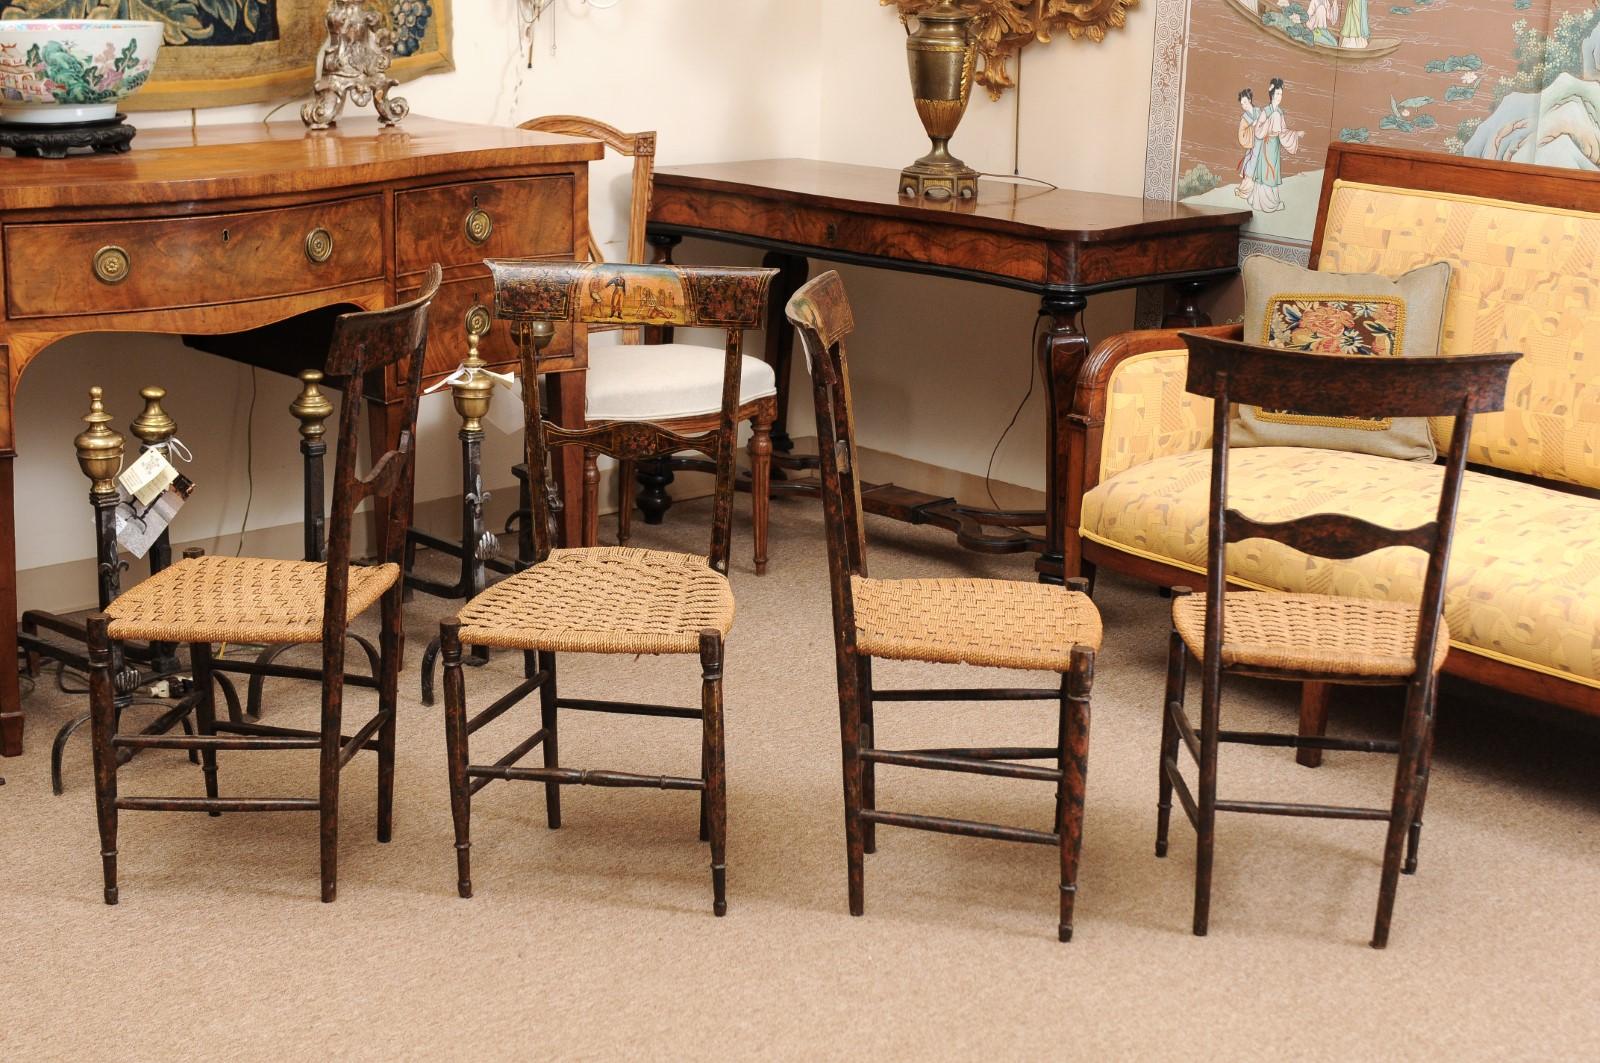 Pair of Neoclassical Black Painted Side Chairs with Woven Seats, Italy ca. 1790 For Sale 9